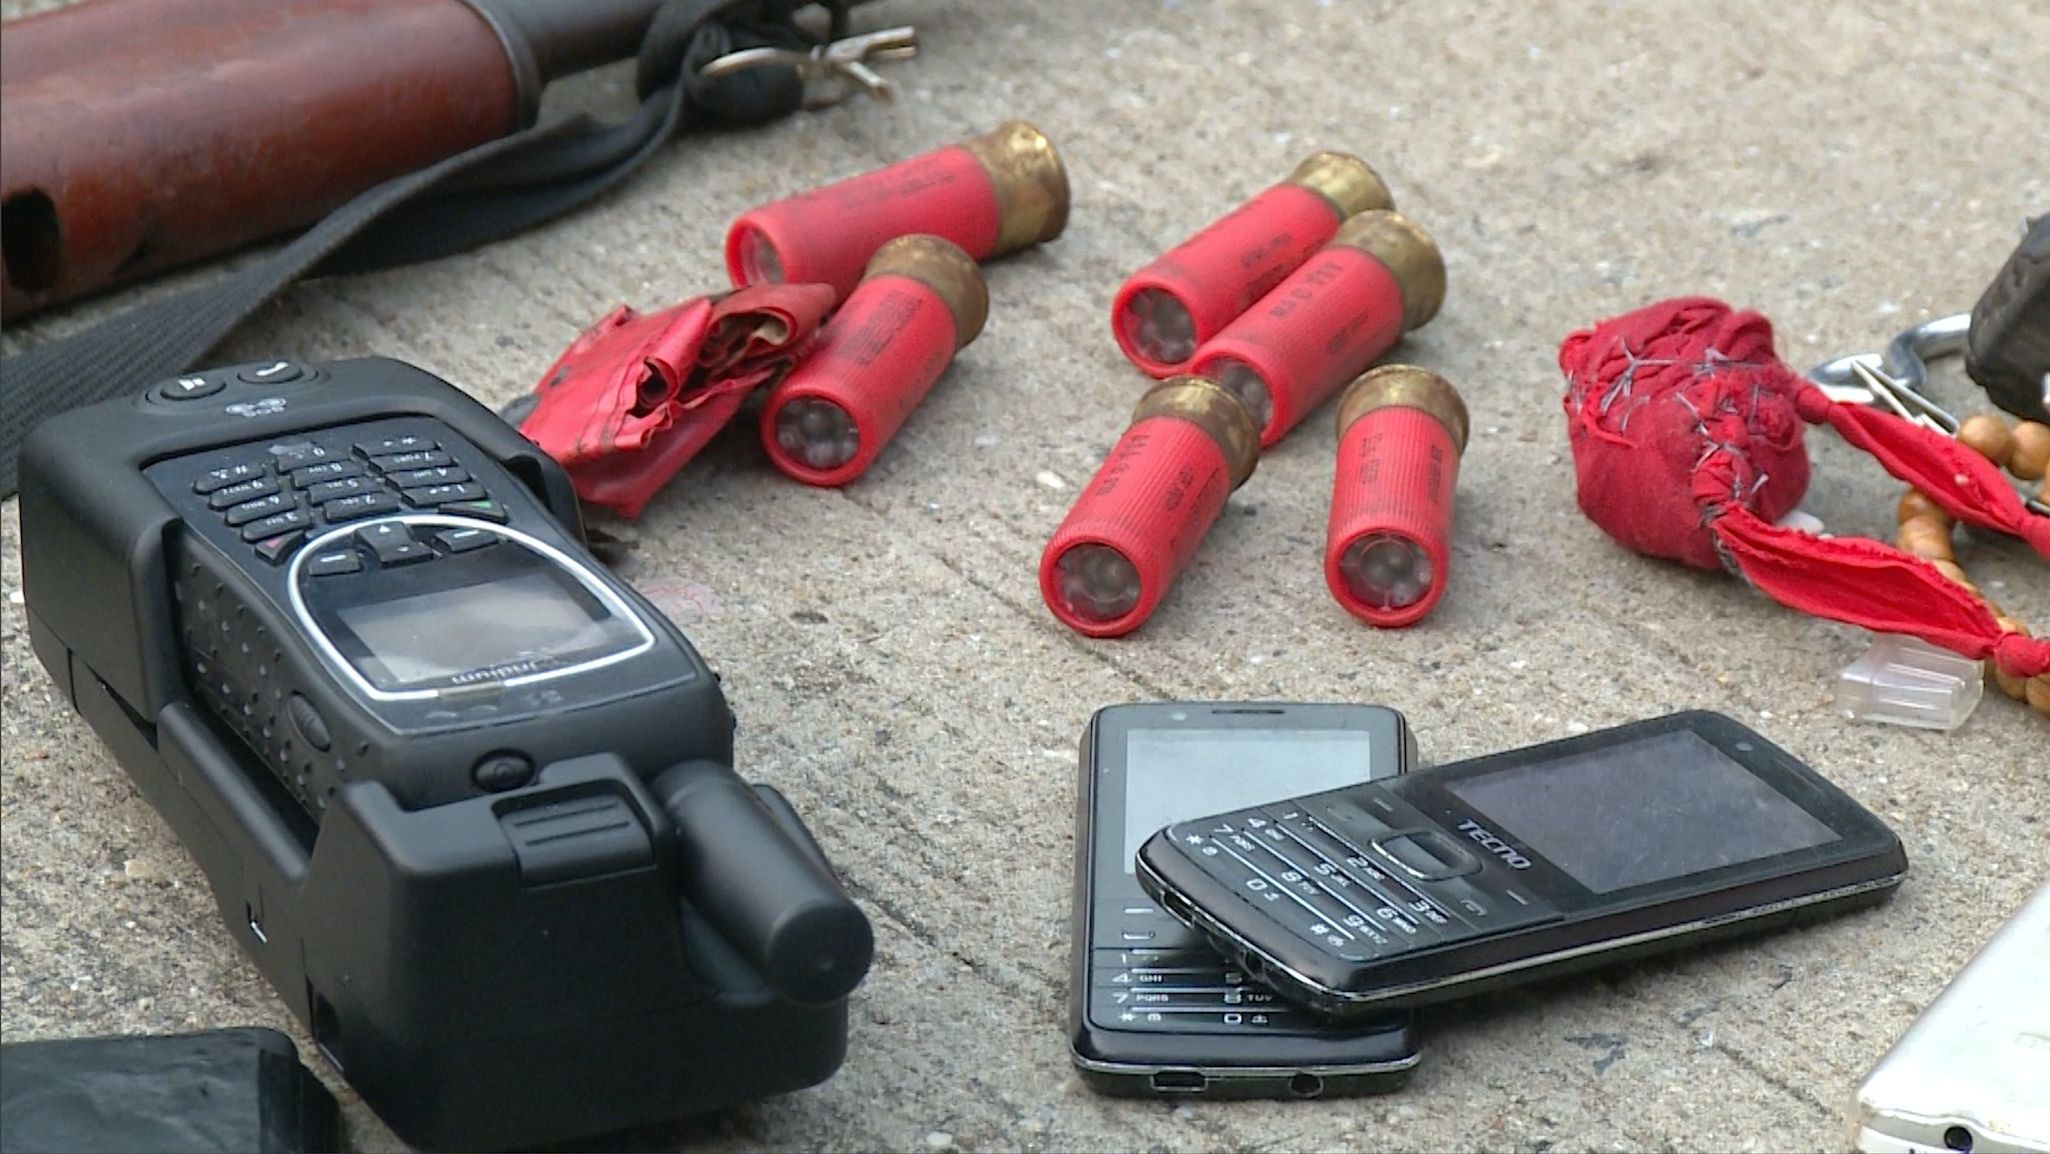 Officers recovered from the ship AK47s, magazines, bullets and satellite phones